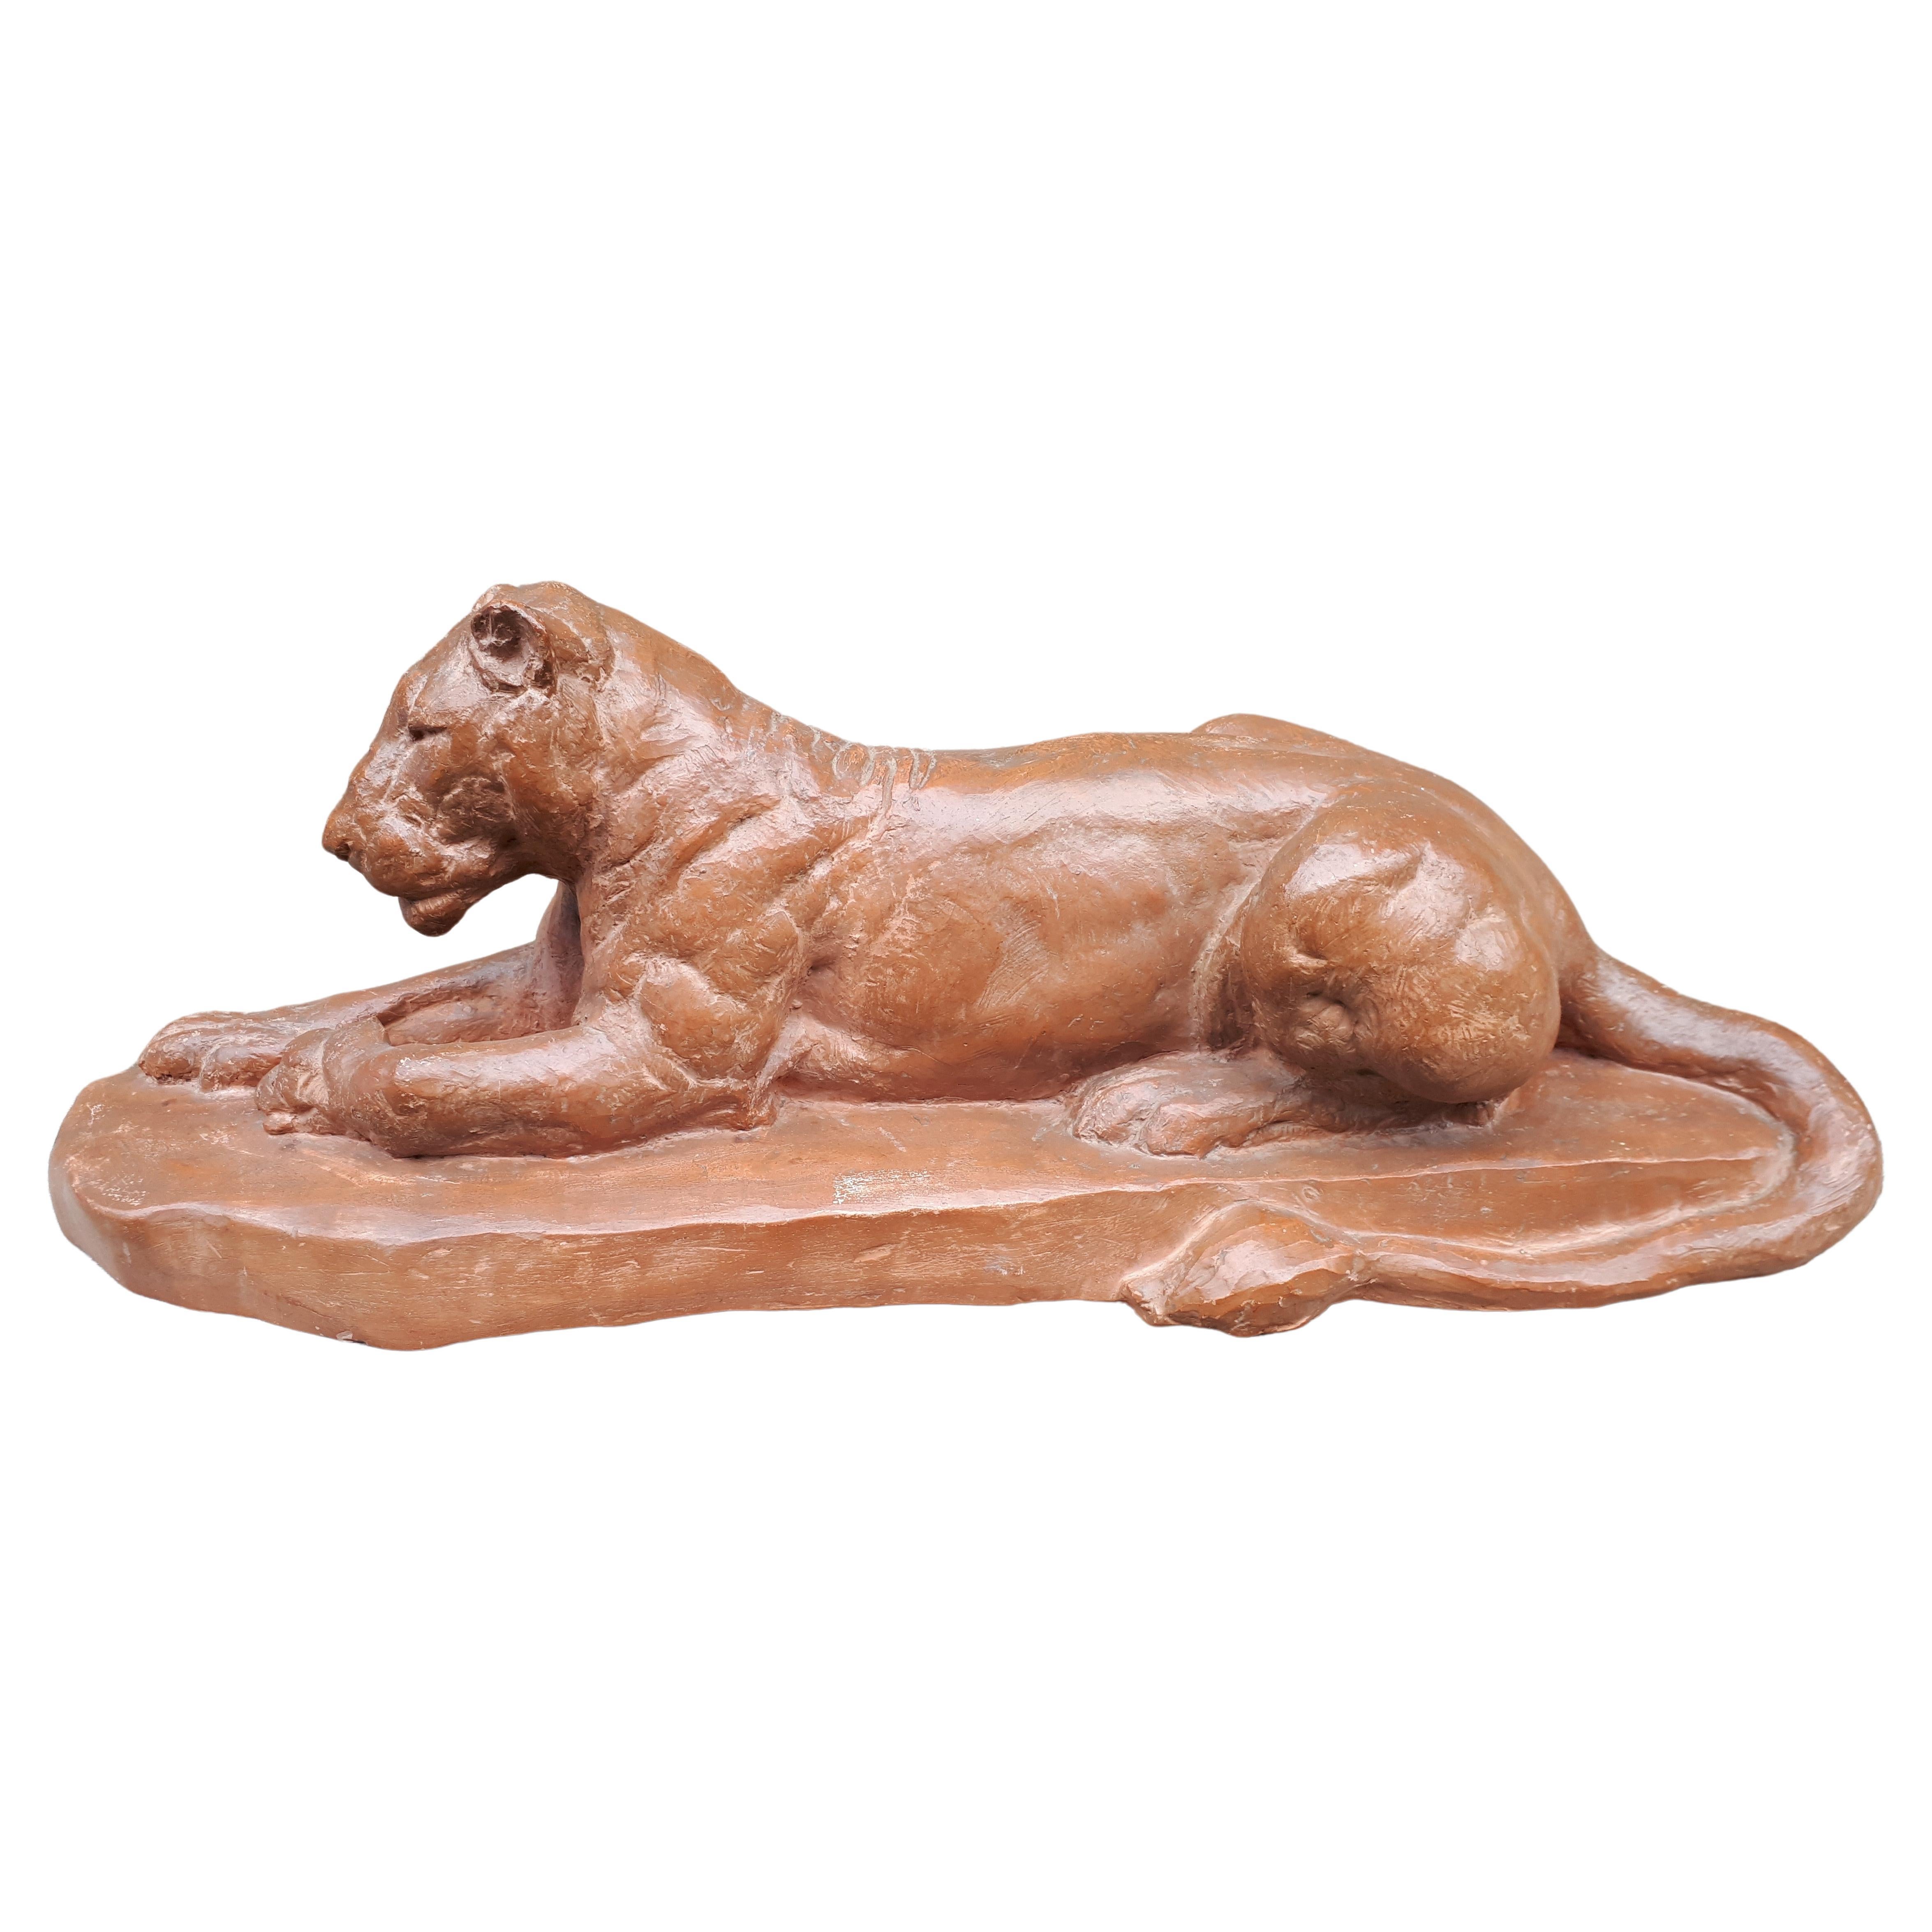 Sculpture Of A Lying Lioness, By Cocry (édition Martel)